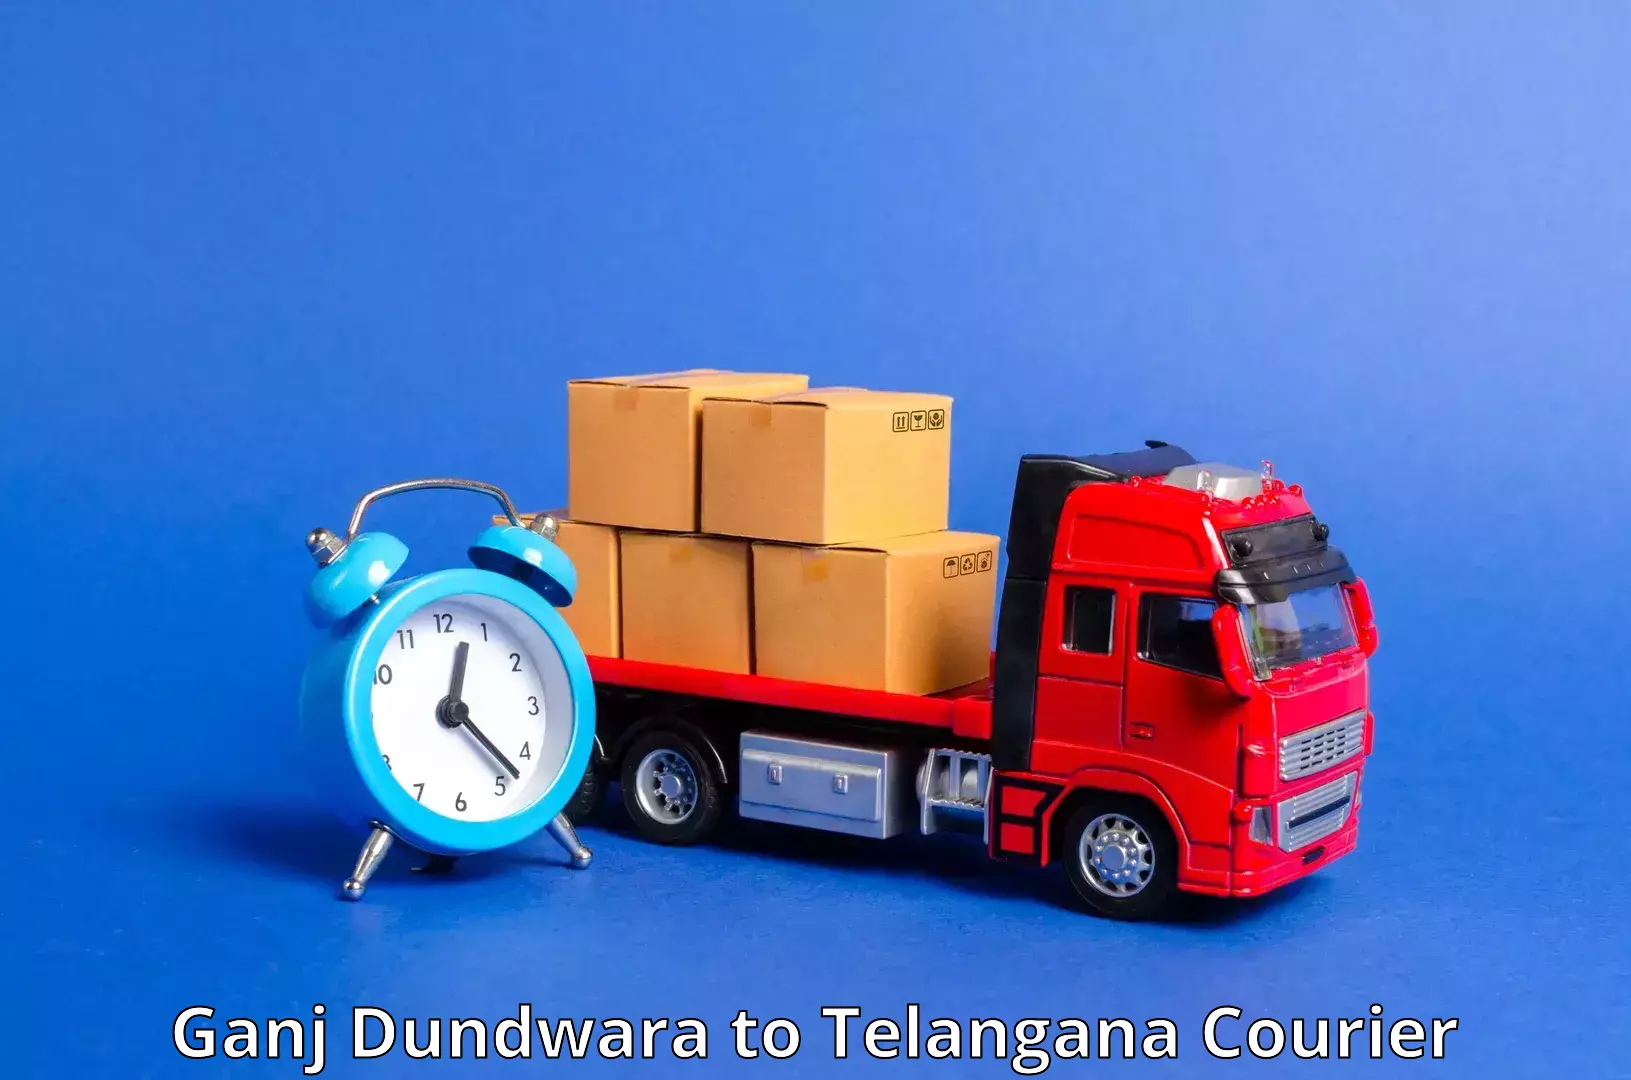 Same-day delivery solutions in Ganj Dundwara to Ghanpur